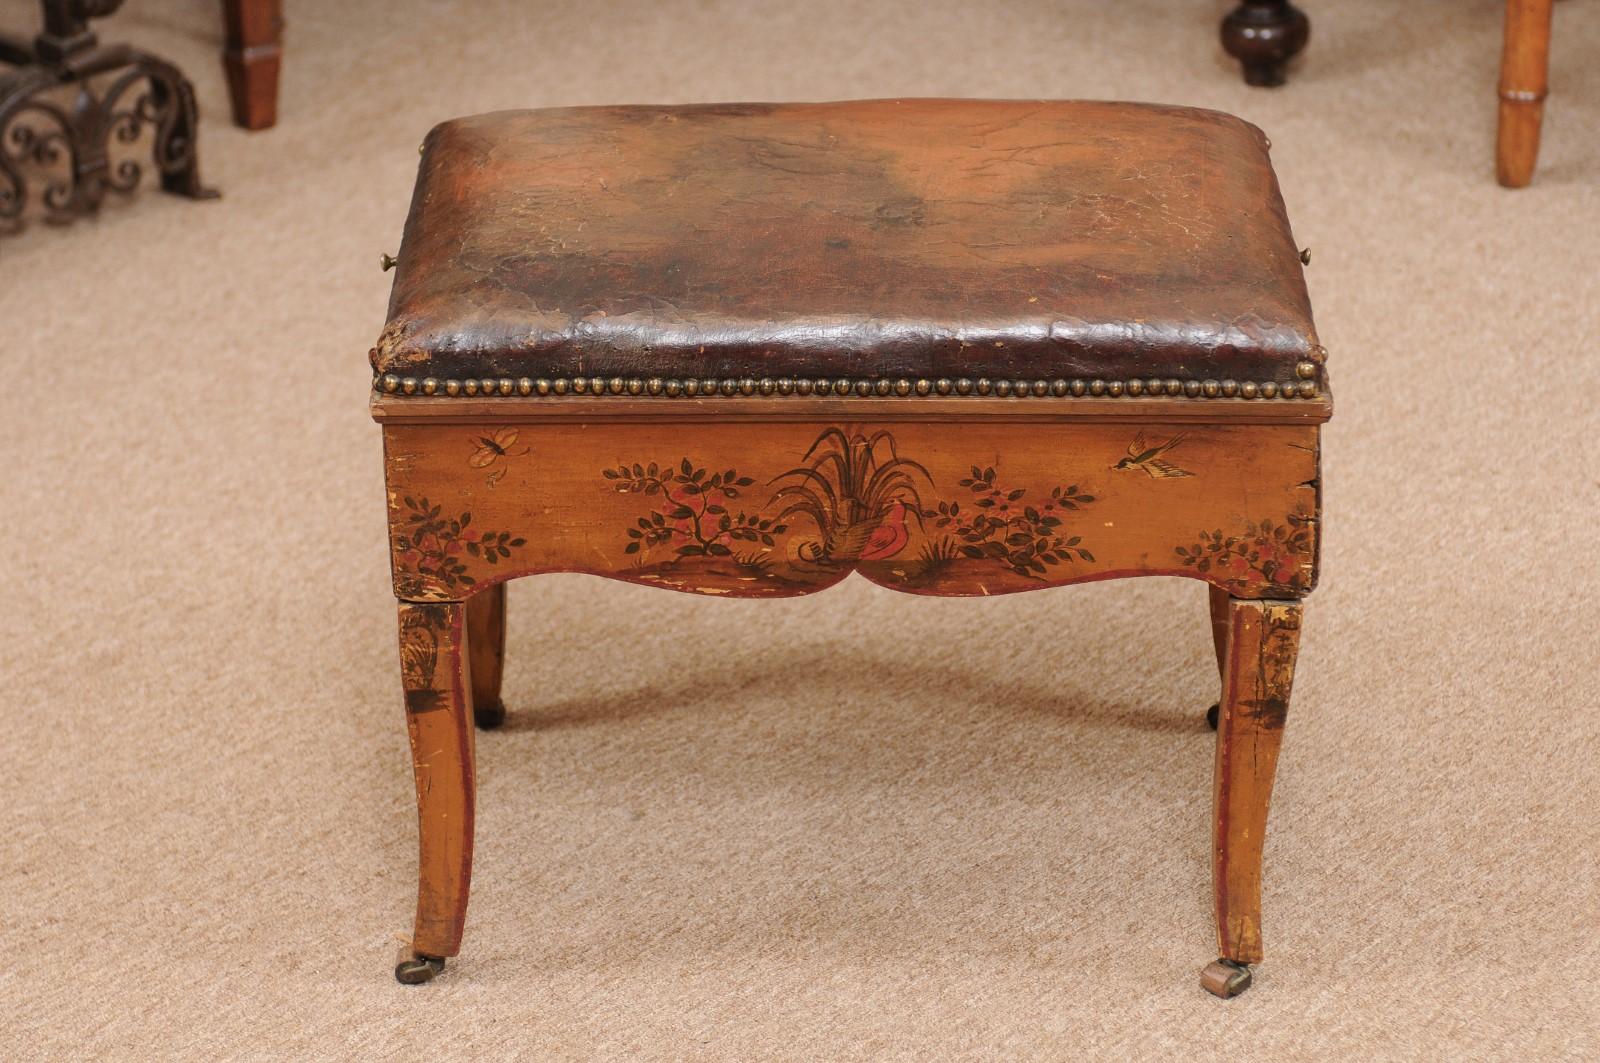 18th Century Italian Stool with Painted Decoration & Leather Upholstered Seat 4